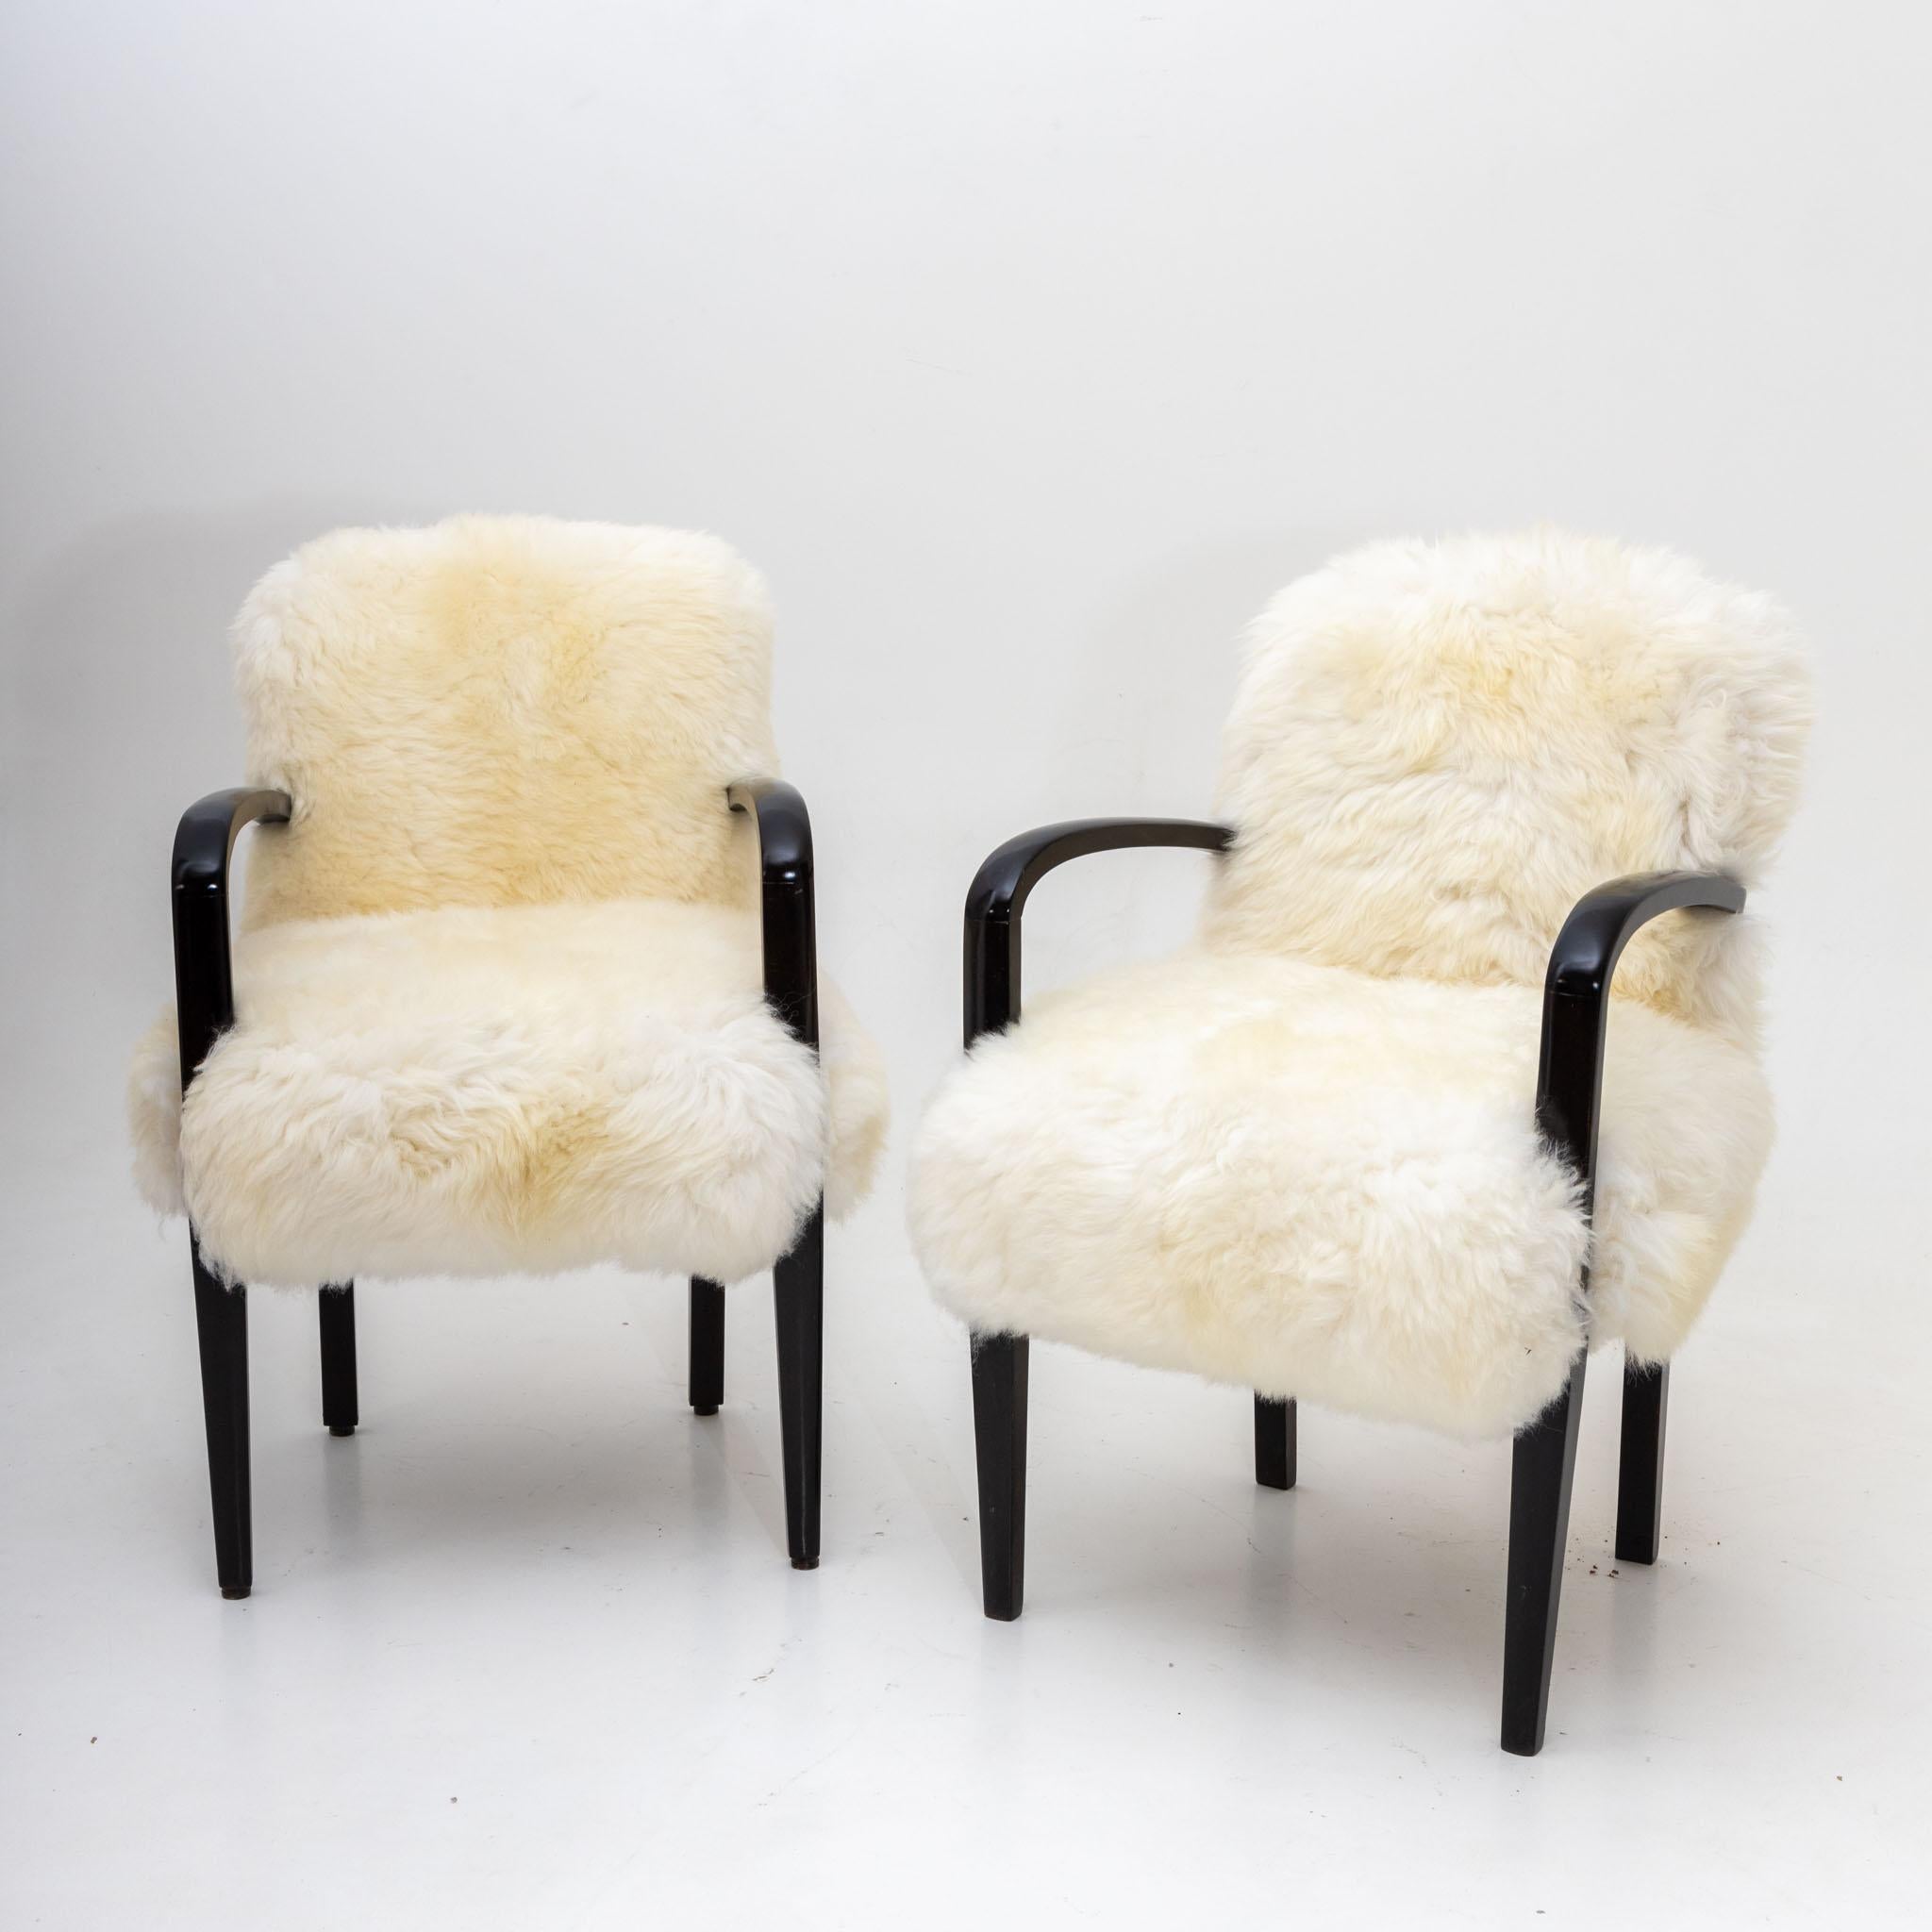 Pair of sheepskin armchairs with black legs and armrests. The armchairs have been newly covered with a genuine sheepskin and hand-polished.